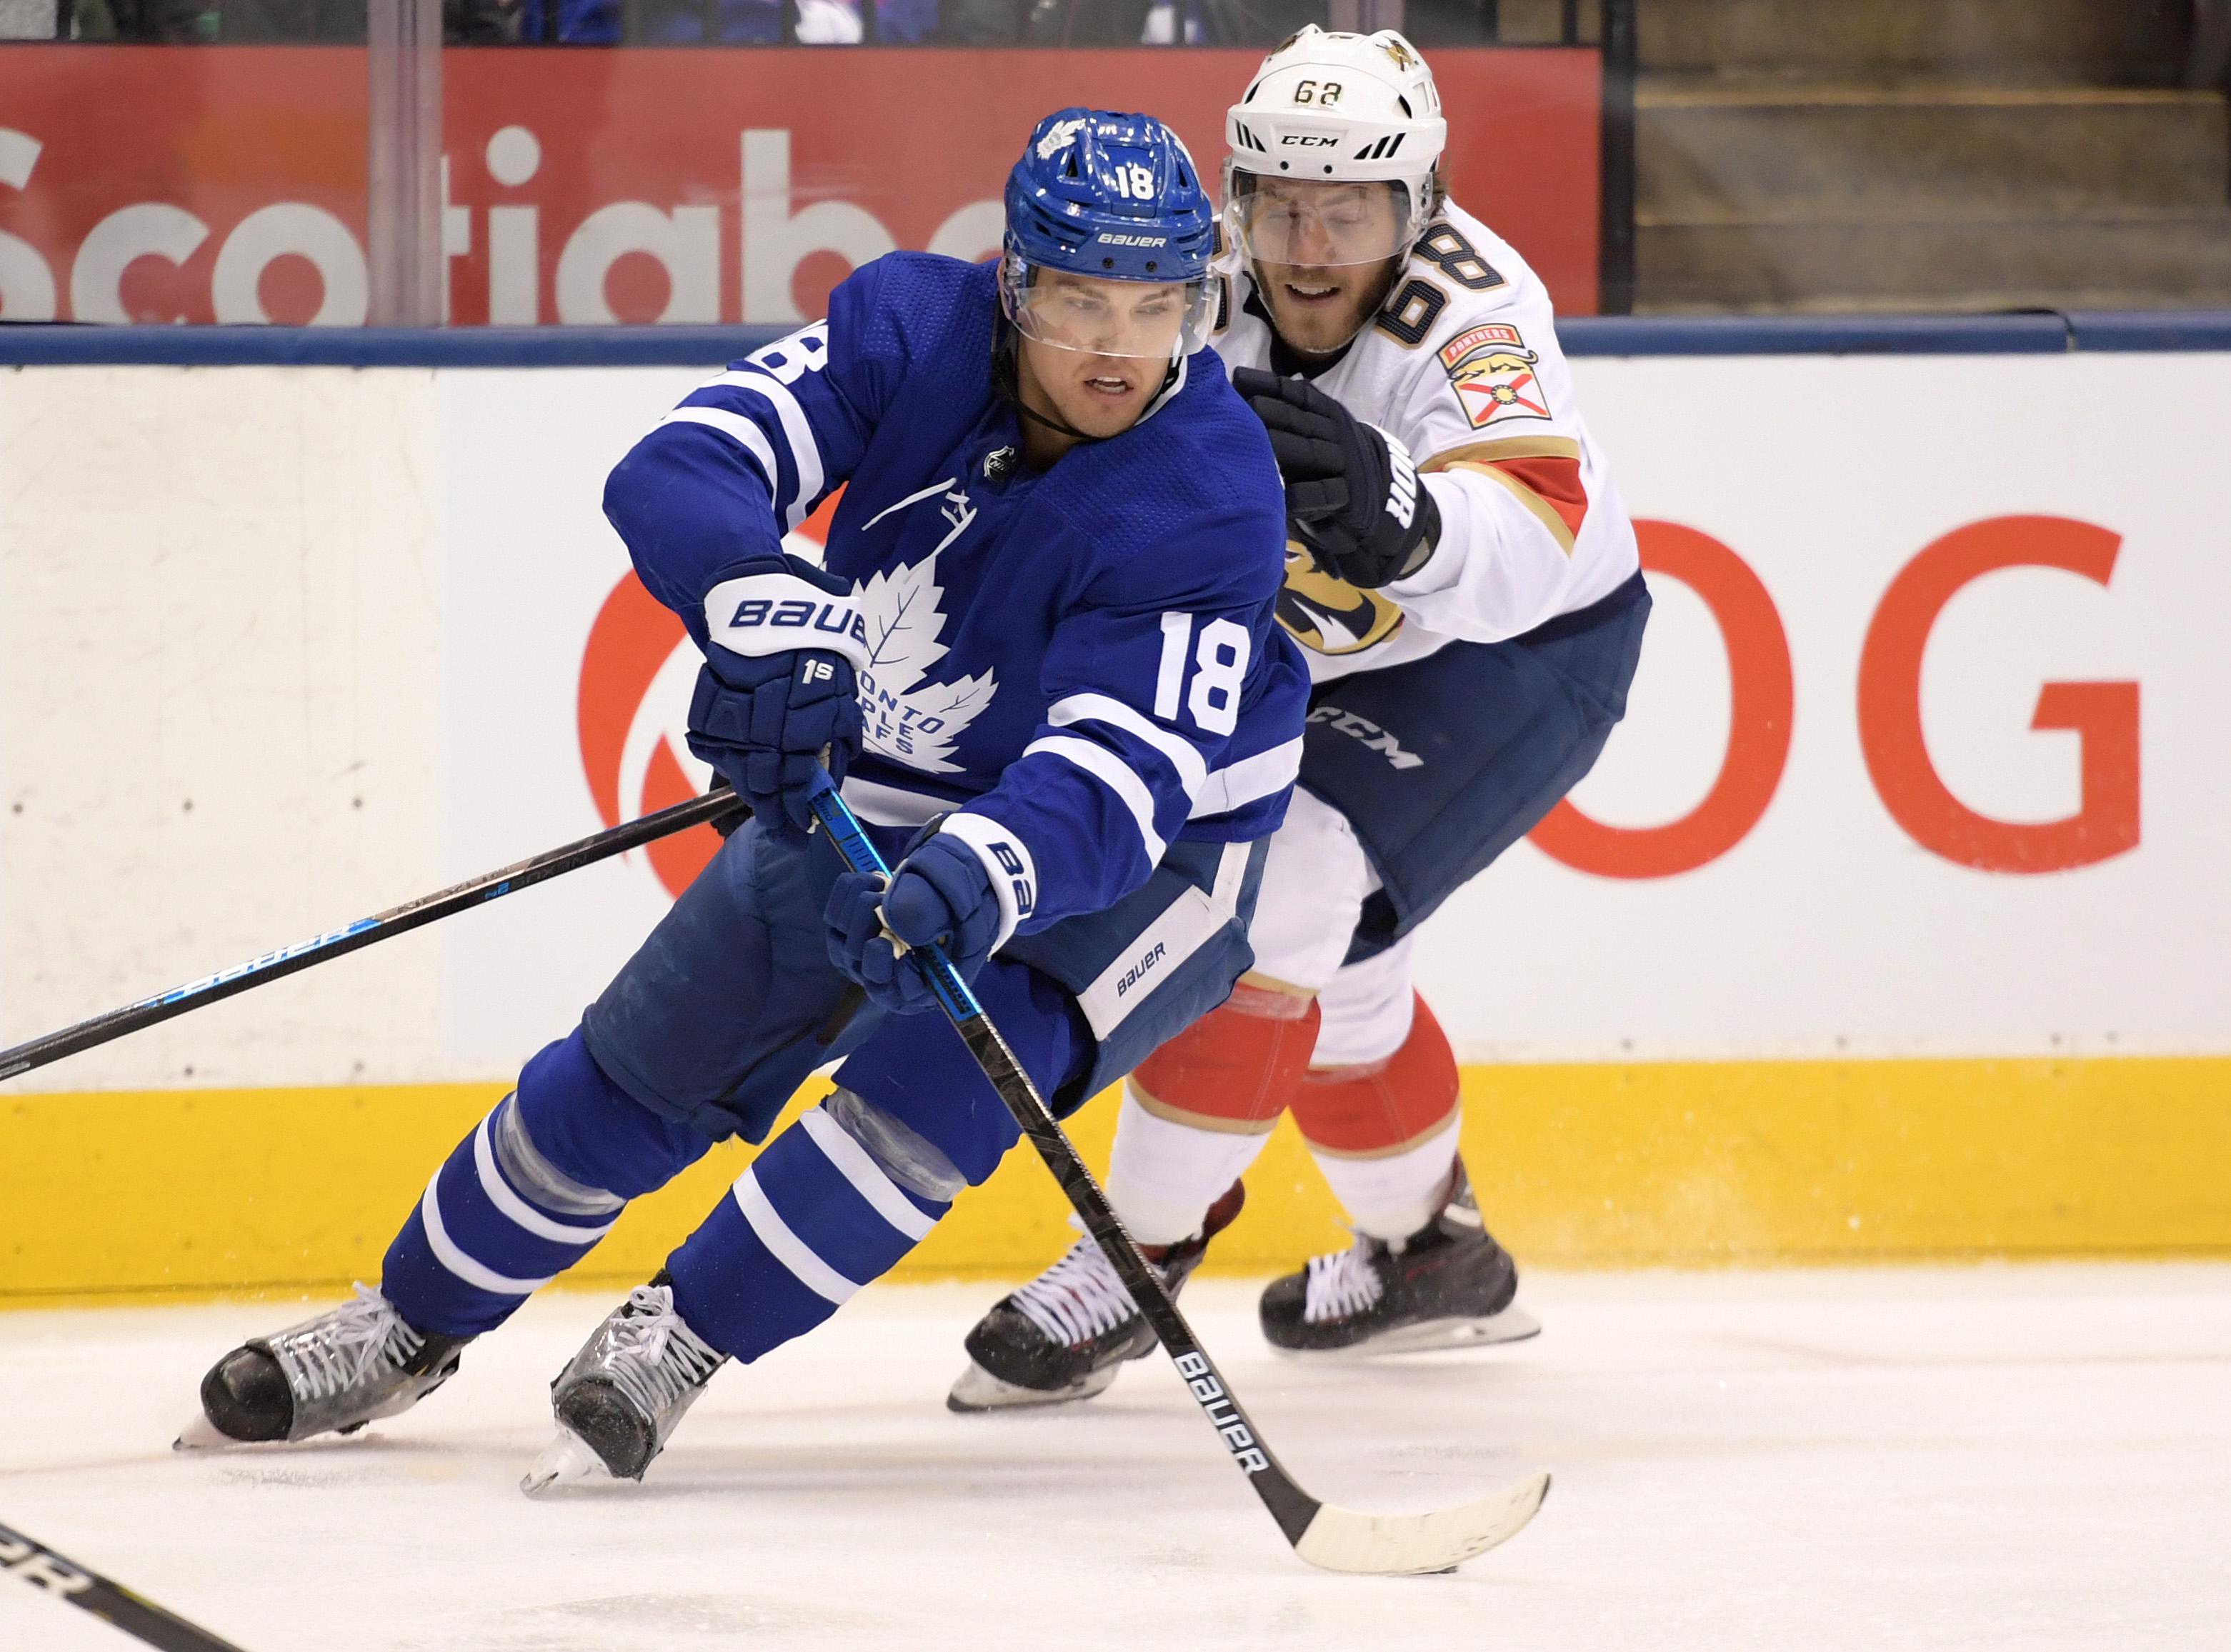 Feb 3, 2020; Toronto, Ontario, CAN; Toronto Maple Leafs forward Andreas Johnsson (18) cuts past Florida Panthers forward Mike Hoffman (68) in the second period at Scotiabank Arena. / Dan Hamilton-USA TODAY Sports